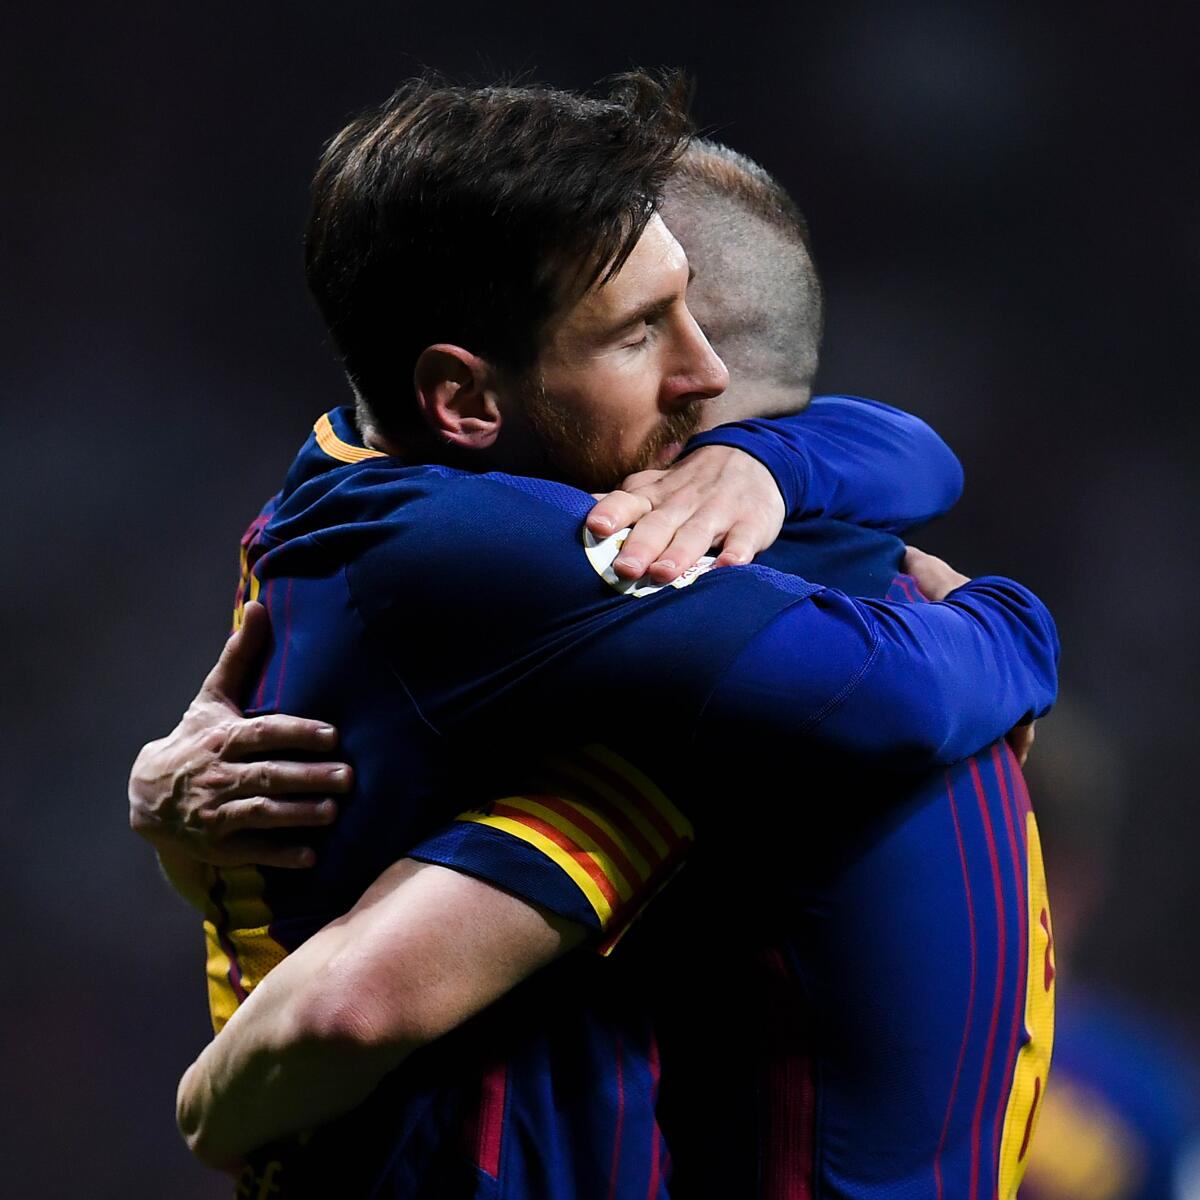 BARCELONA, SPAIN - APRIL 21: Lionel Messi of FC Barcelona hugs his team mate Andres Iniesta of FC Barcelona after Iniesta scored his team's fourth goal during the Spanish Copa del Rey Final match between Barcelona and Sevilla at Wanda Metropolitano stadium on April 21, 2018 in Barcelona, Spain. (Photo by David Ramos/Getty Images)